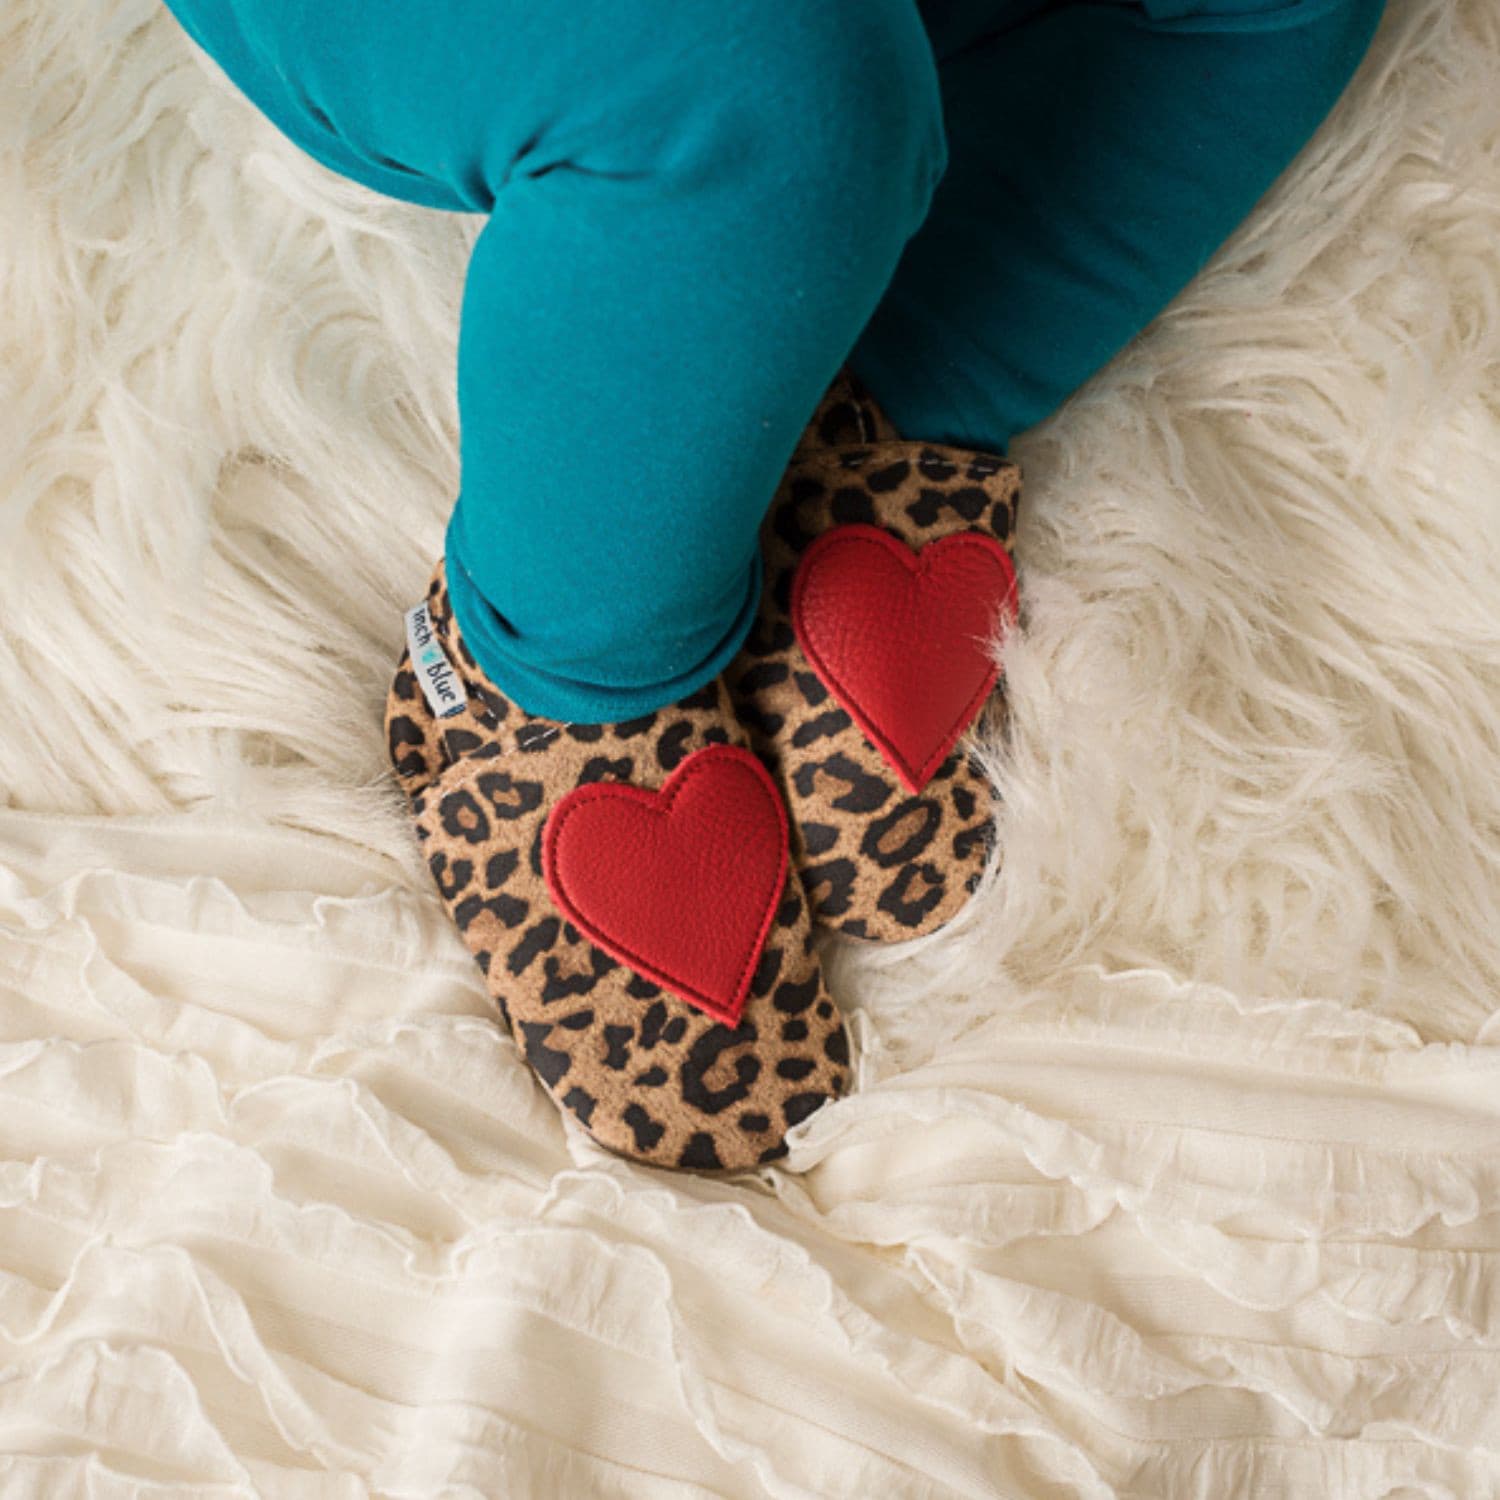 Leopard Print with Heart Soft Shoes.